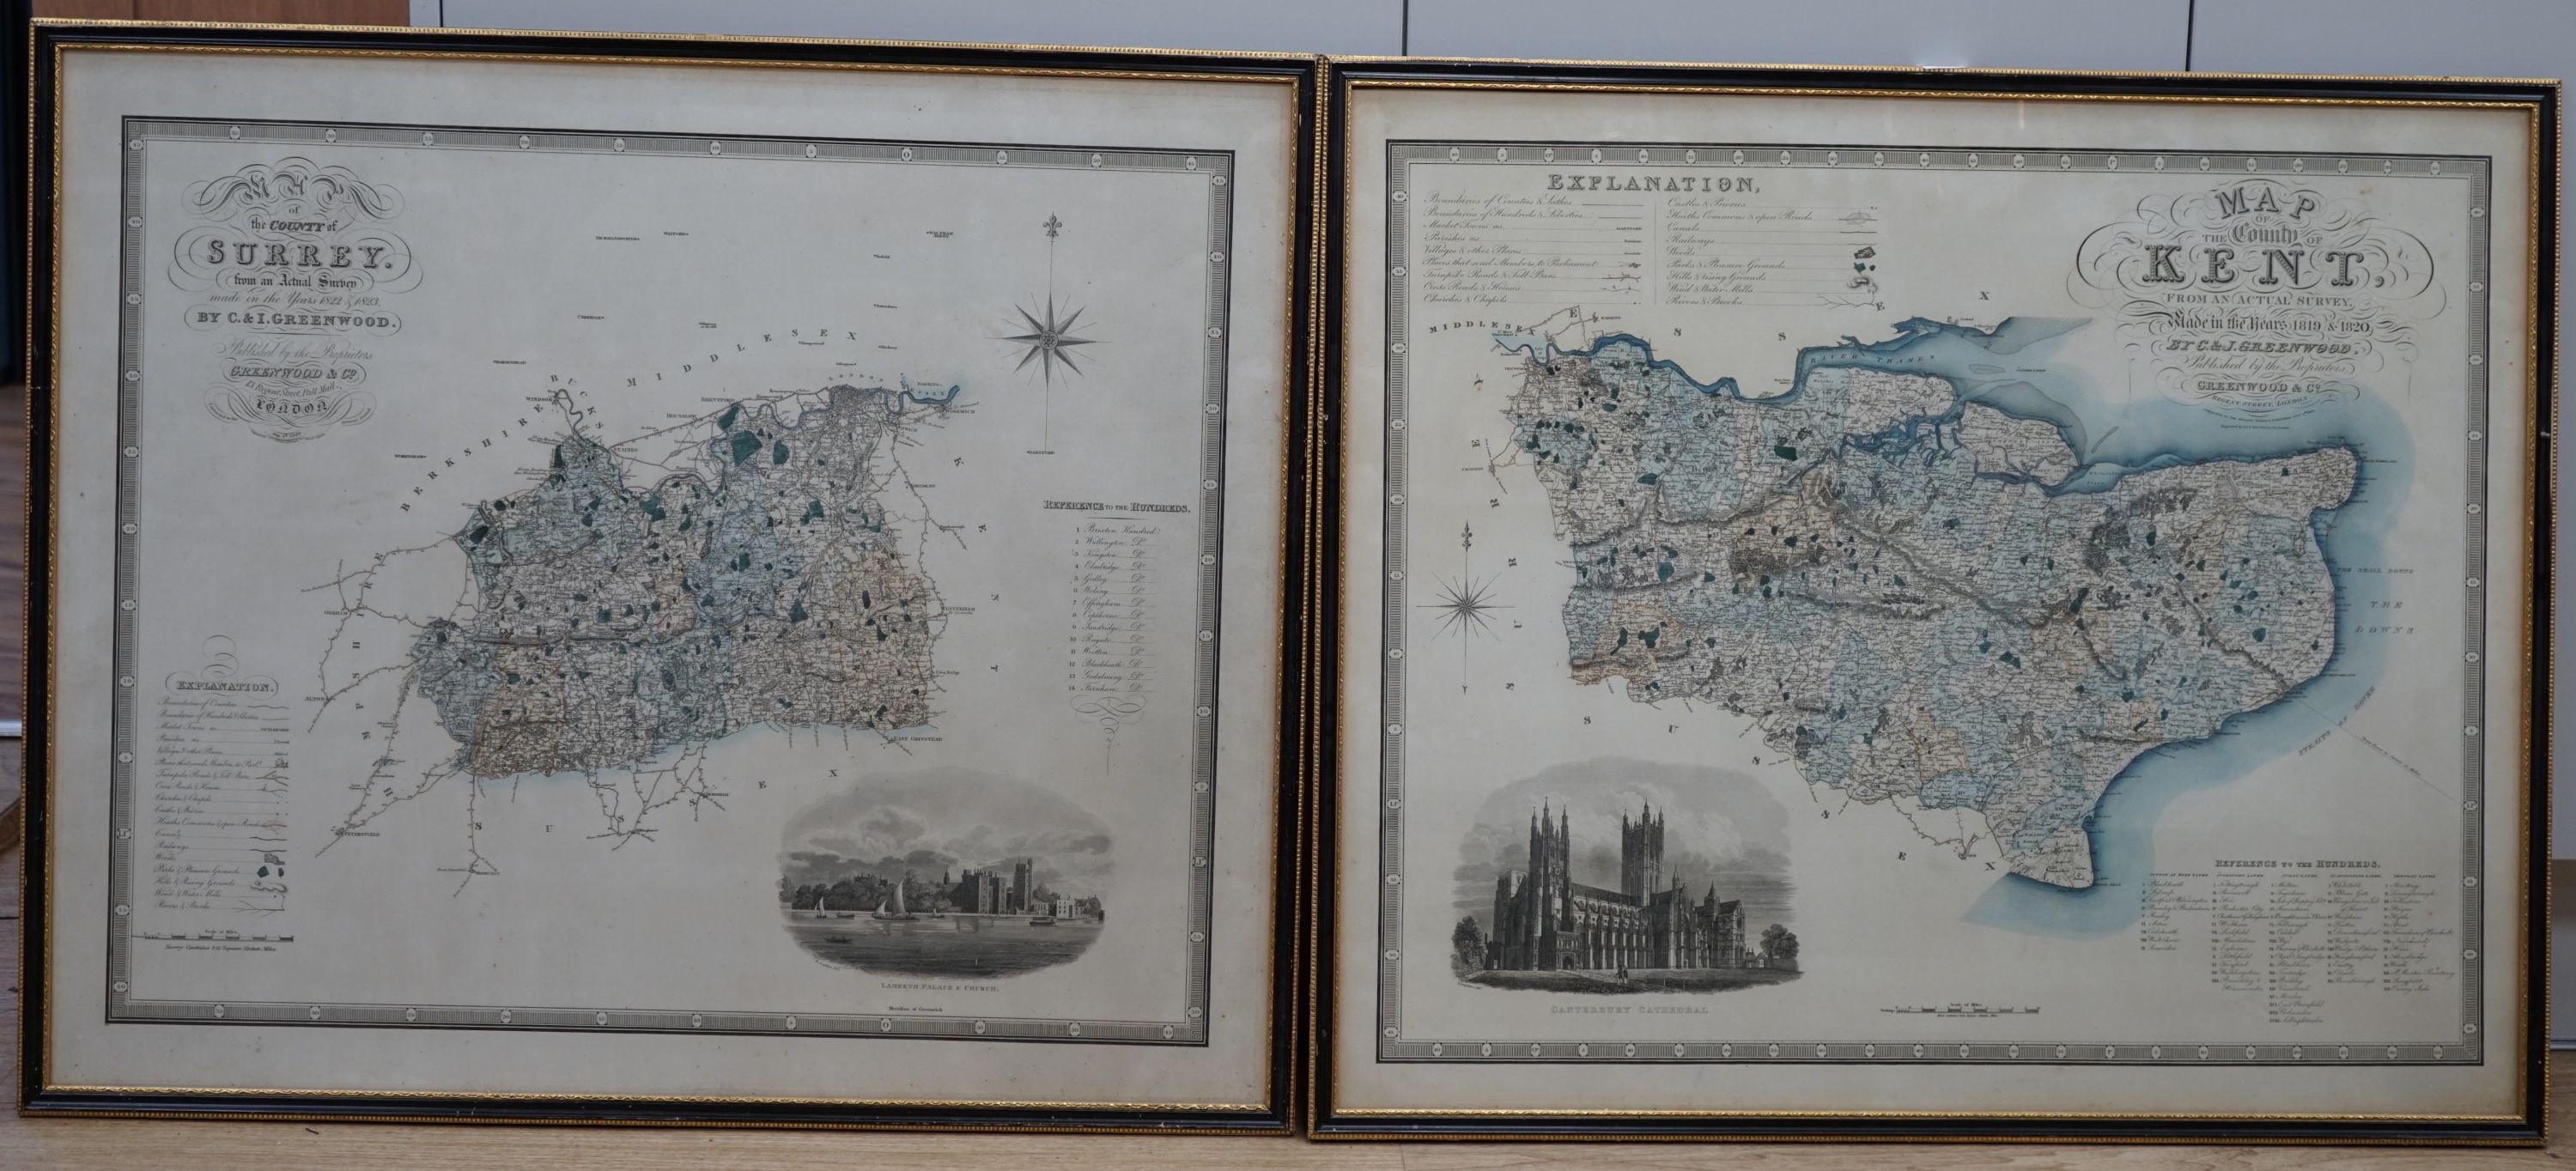 Greenwood & Co, pair of hand coloured engravings, Maps of the Counties of Surrey and Kent, c.1820, 64 x 75cm